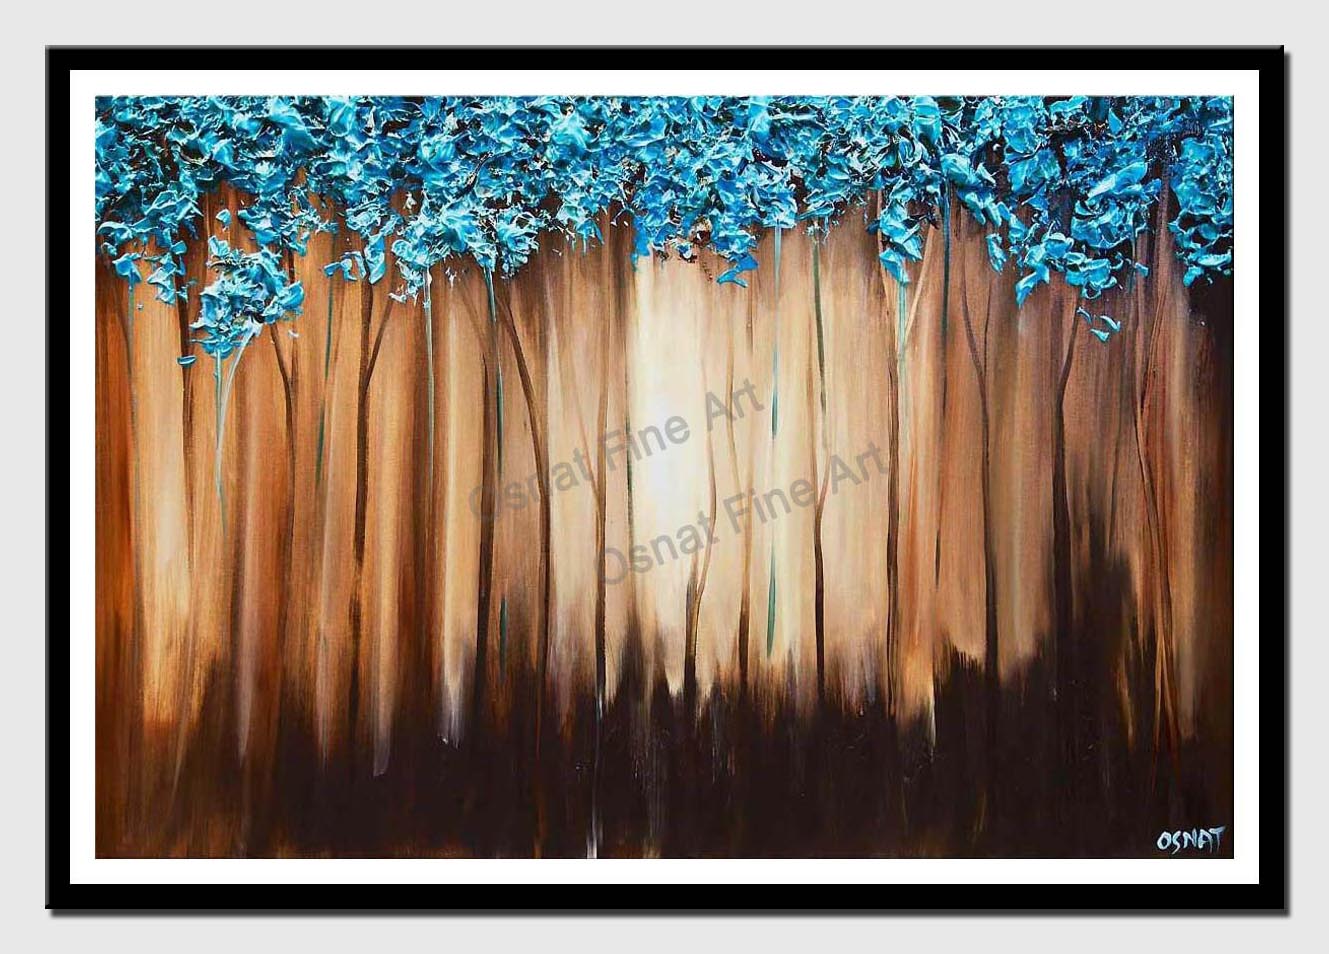 canvas print of modern blue landscape abstract painting